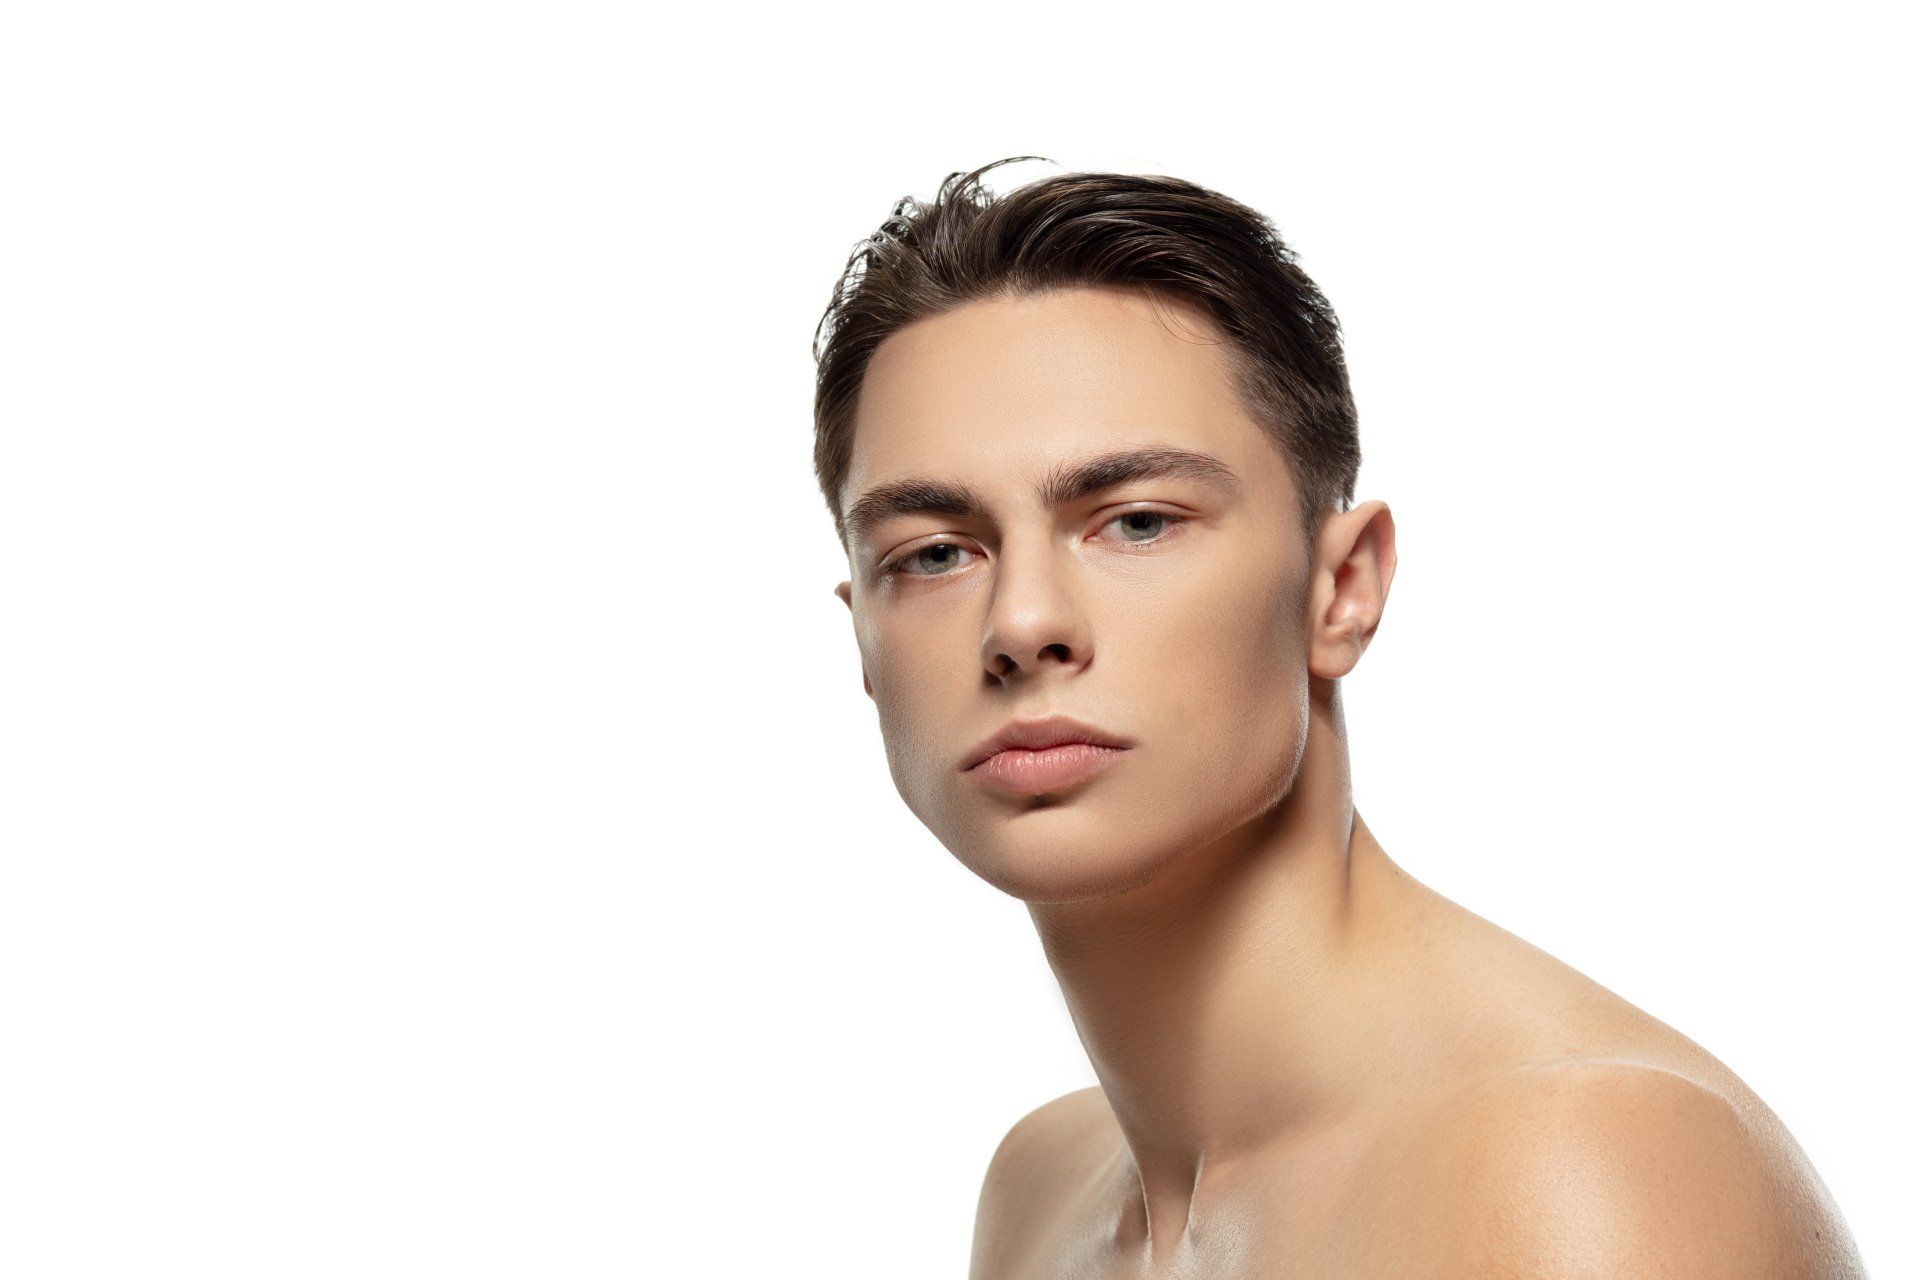 A young man without a shirt is looking at the camera on a white background.